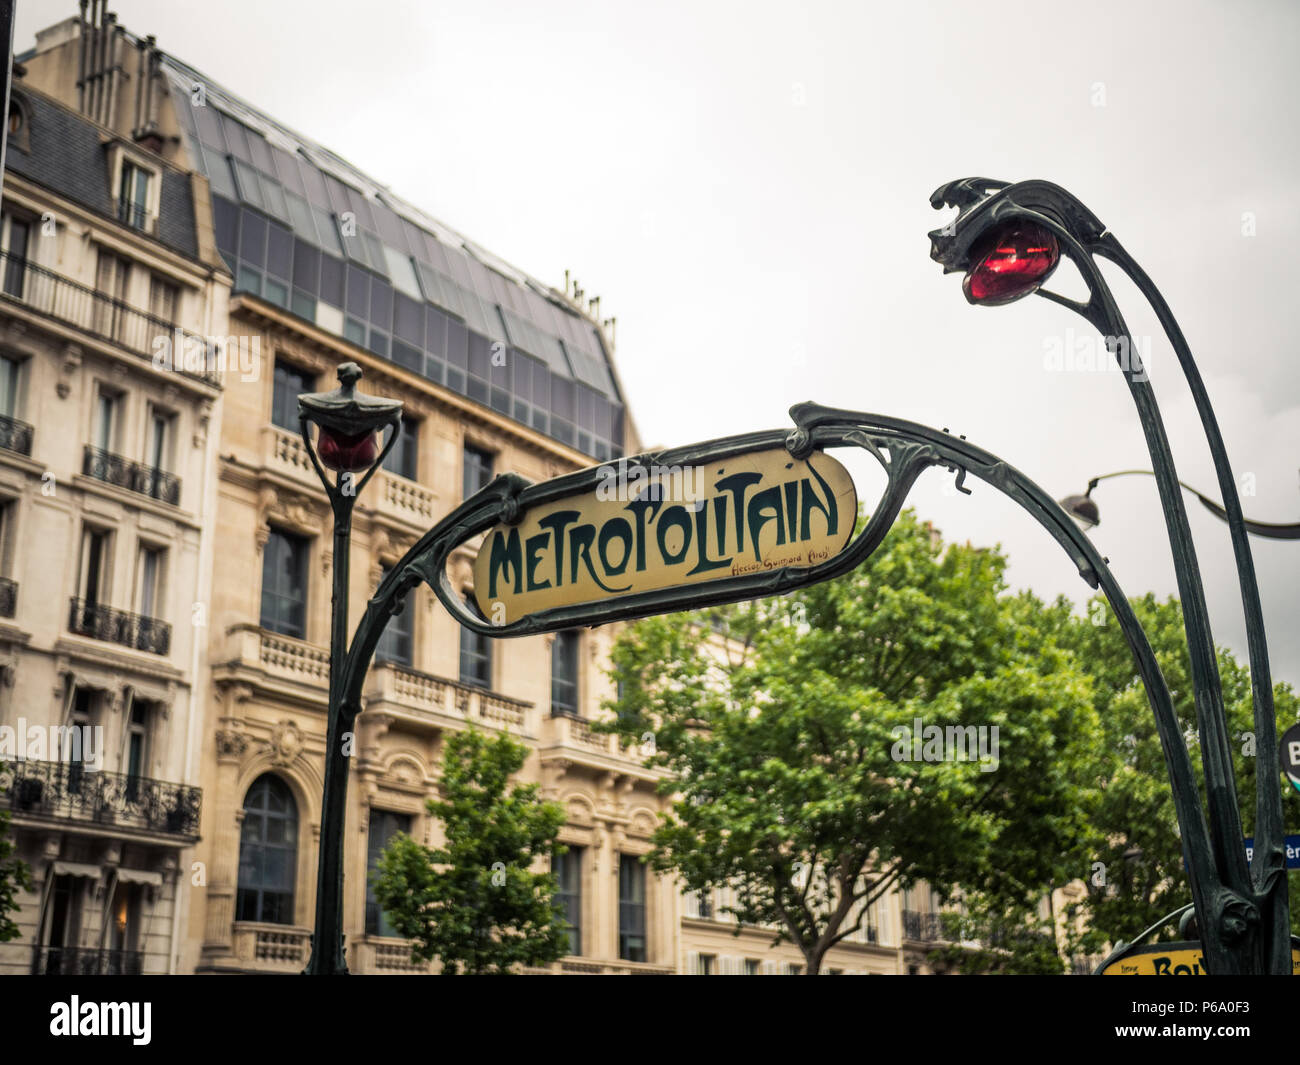 Art Nouveau Metro sign 'Metropolitain' designed by Hector Guimard marking the entrance to a metro station in Paris, France. Stock Photo